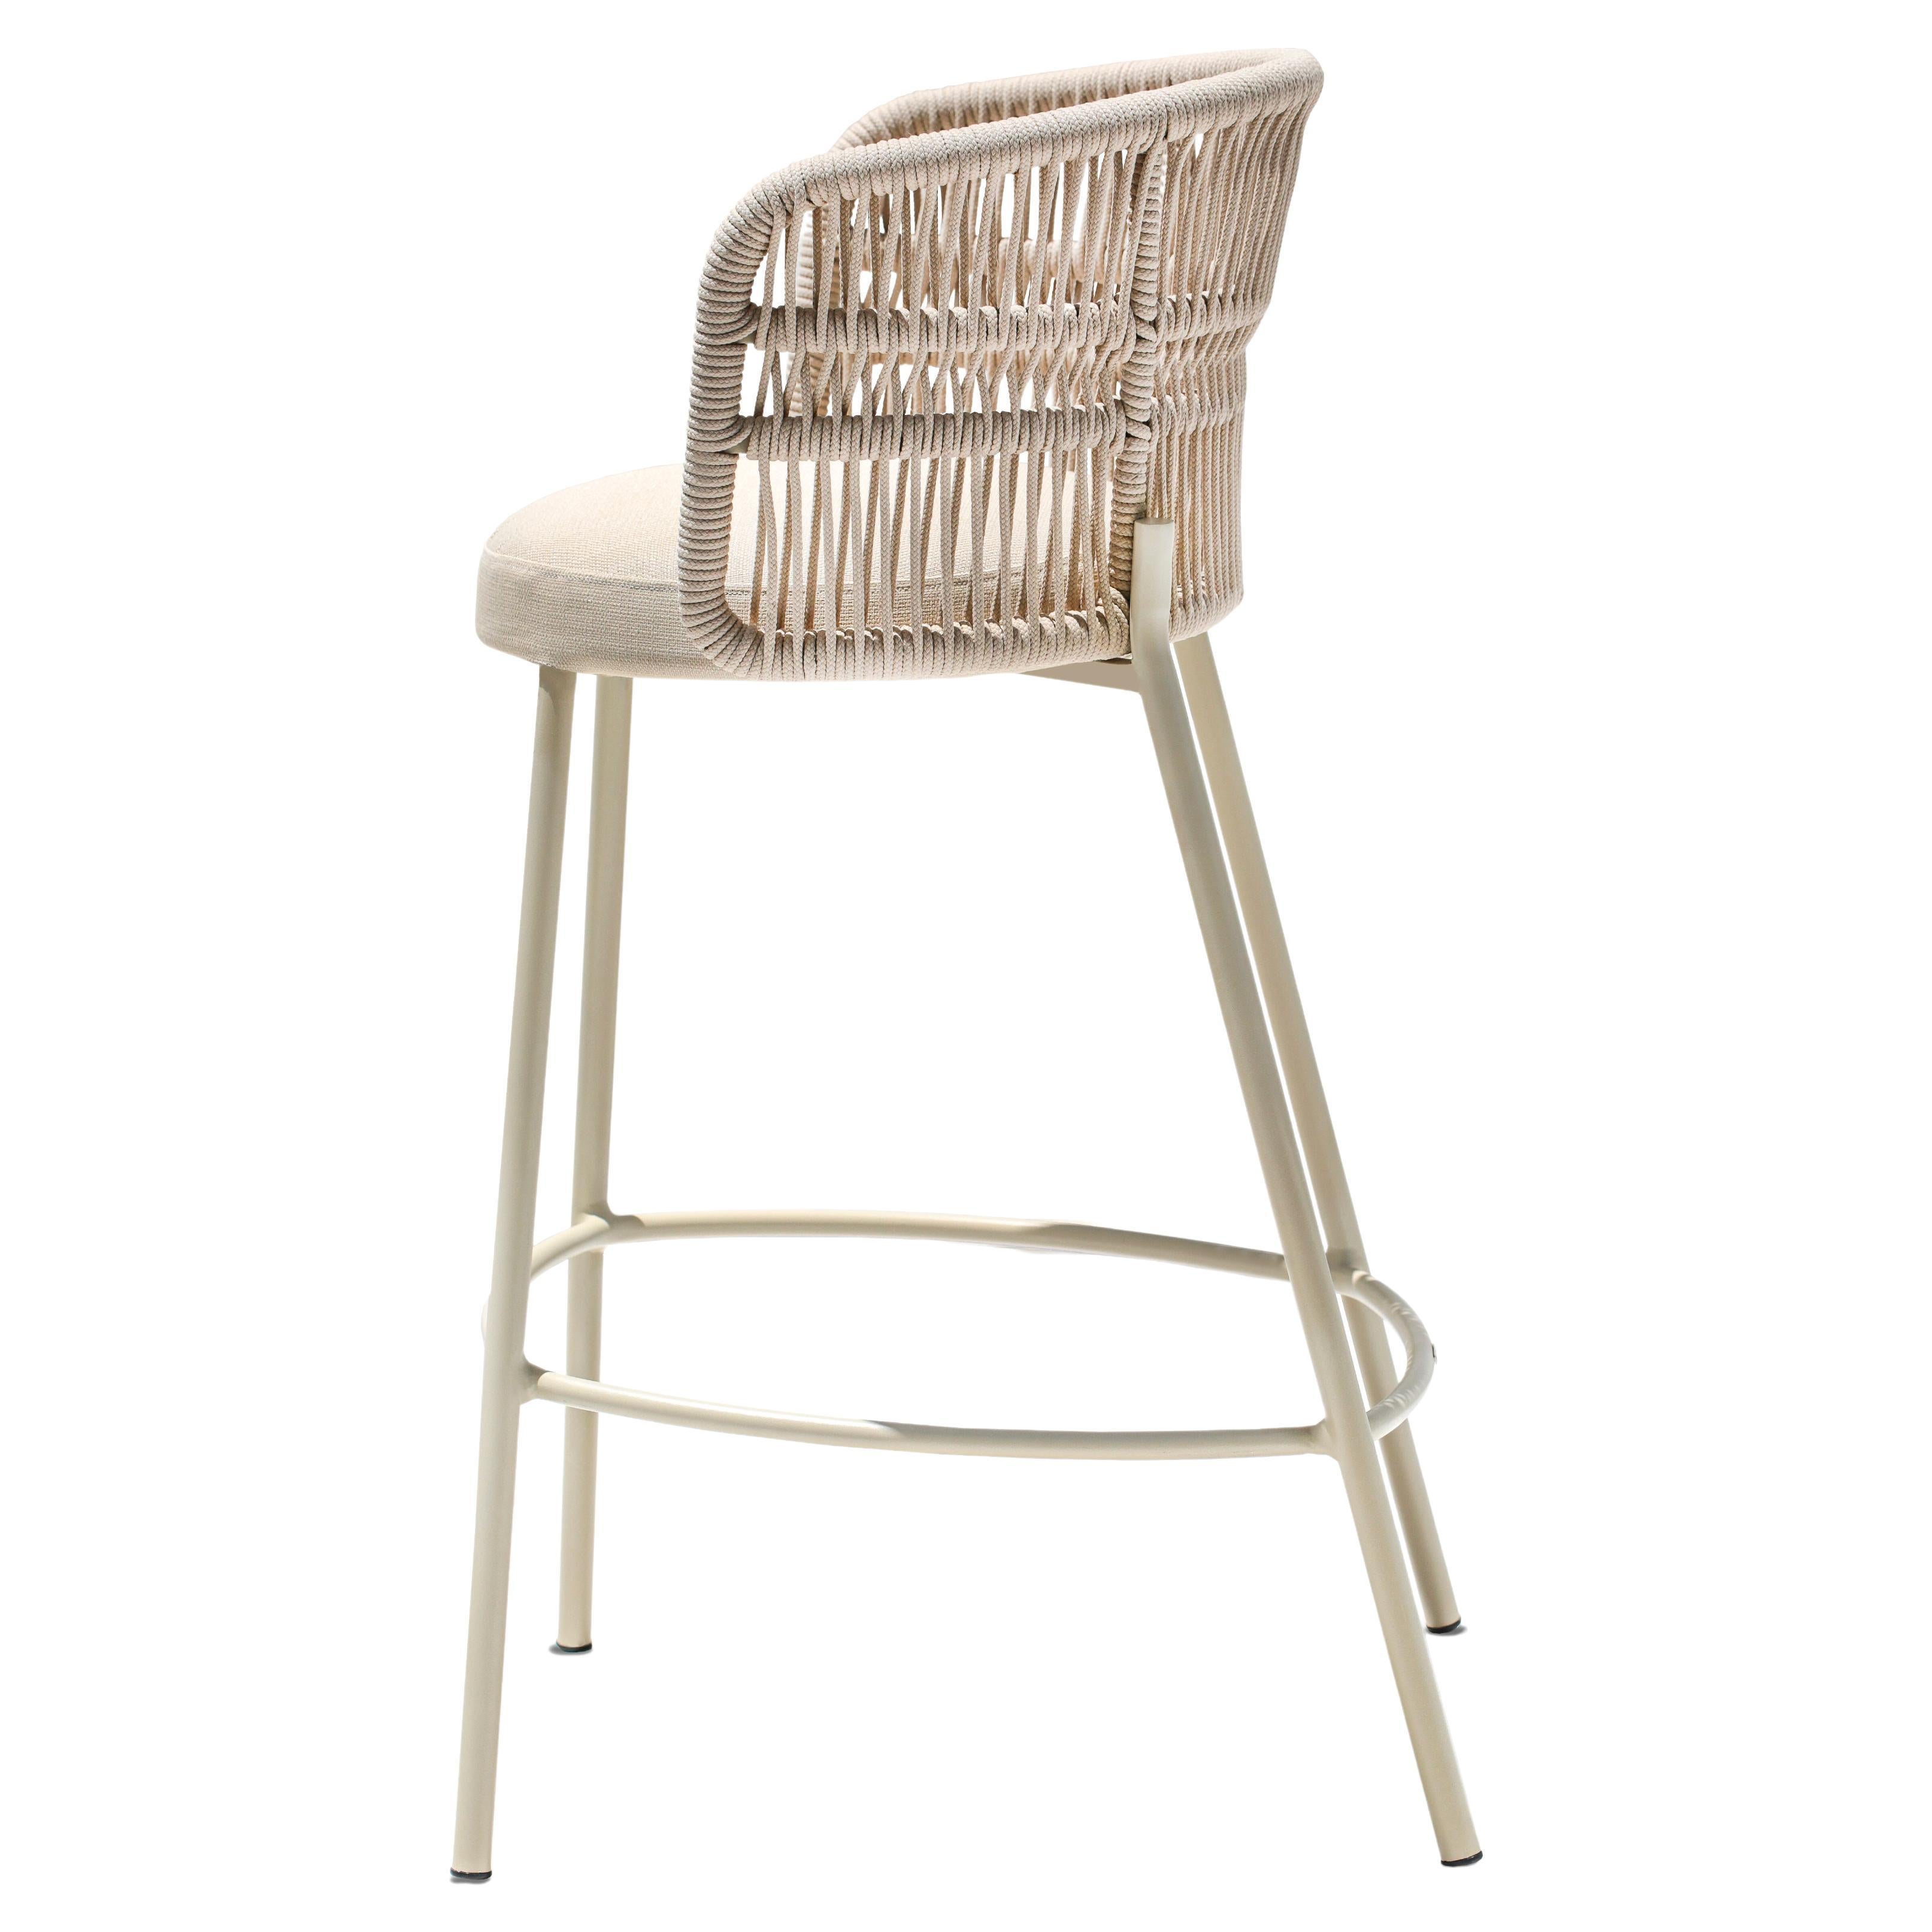 With organic and fluid shapes, the design of the Amalfi chair is inspired by the Italian Amalfi Coast nature.
The fluidity of the design offers a clean, timeless design that is easy to combine in environments.

The structure is made of aluminum with